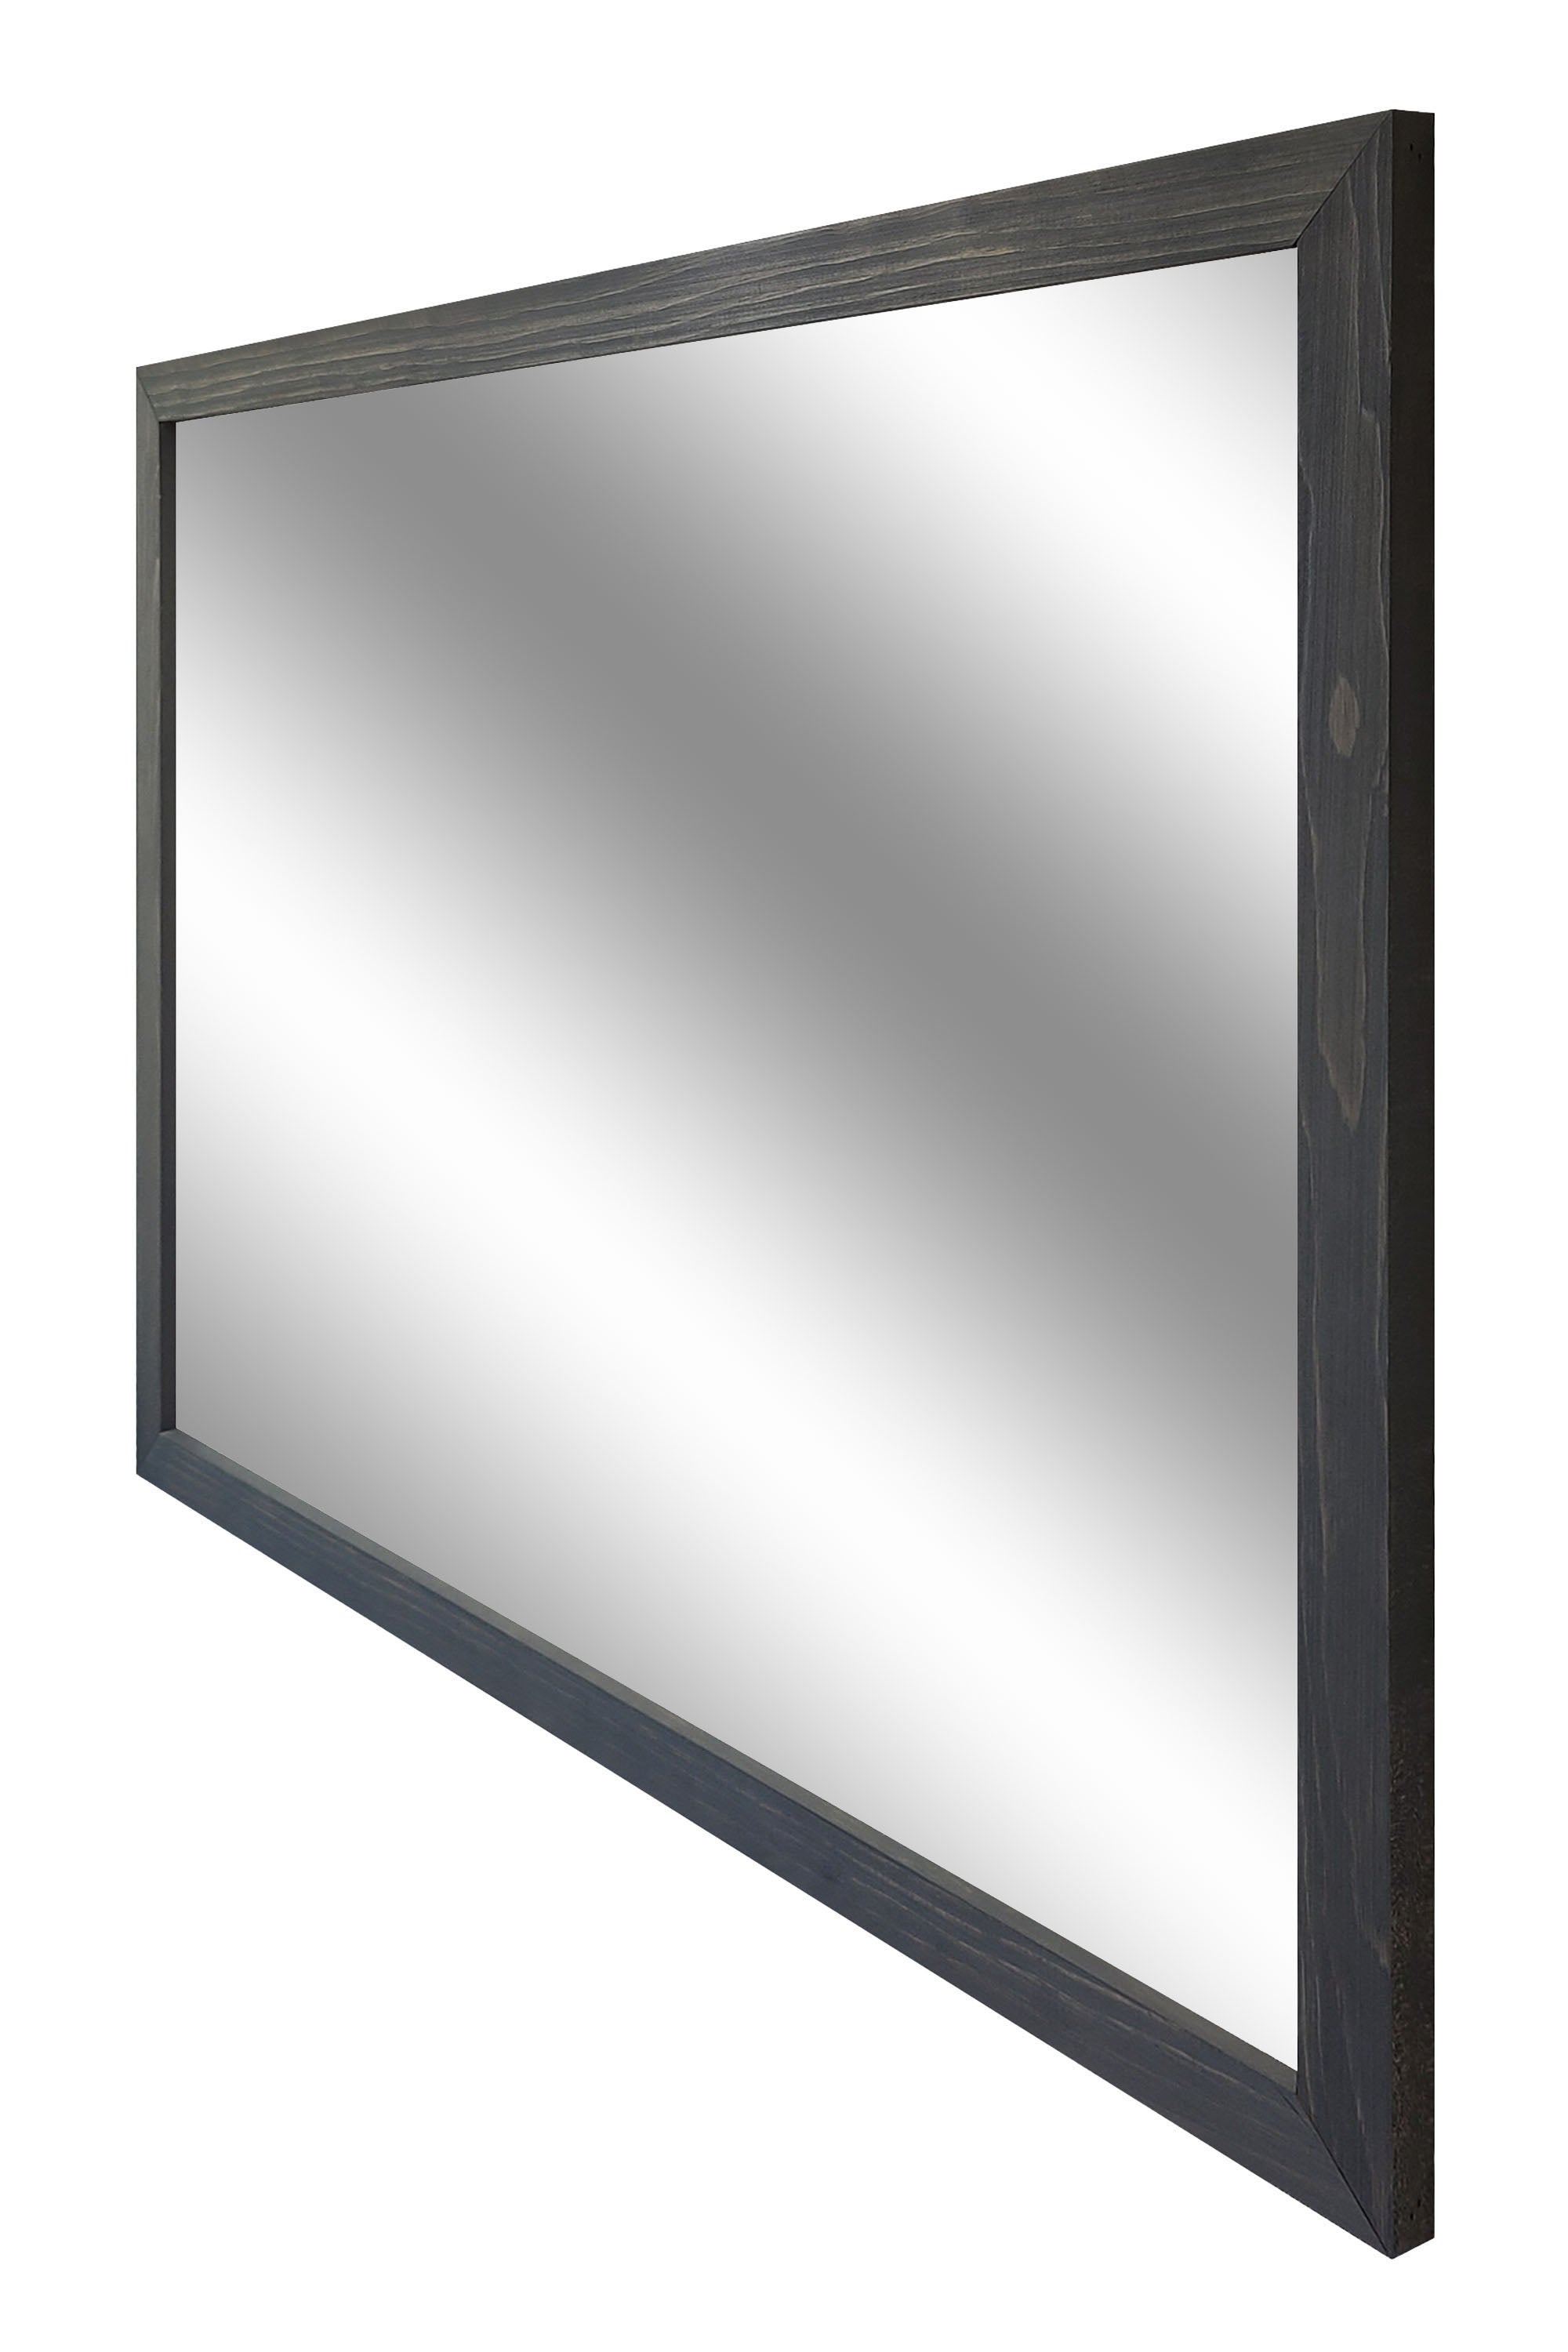 Carriage House Framed Mirror - Available In 20 Stain Colors, Shown in Classic Gray